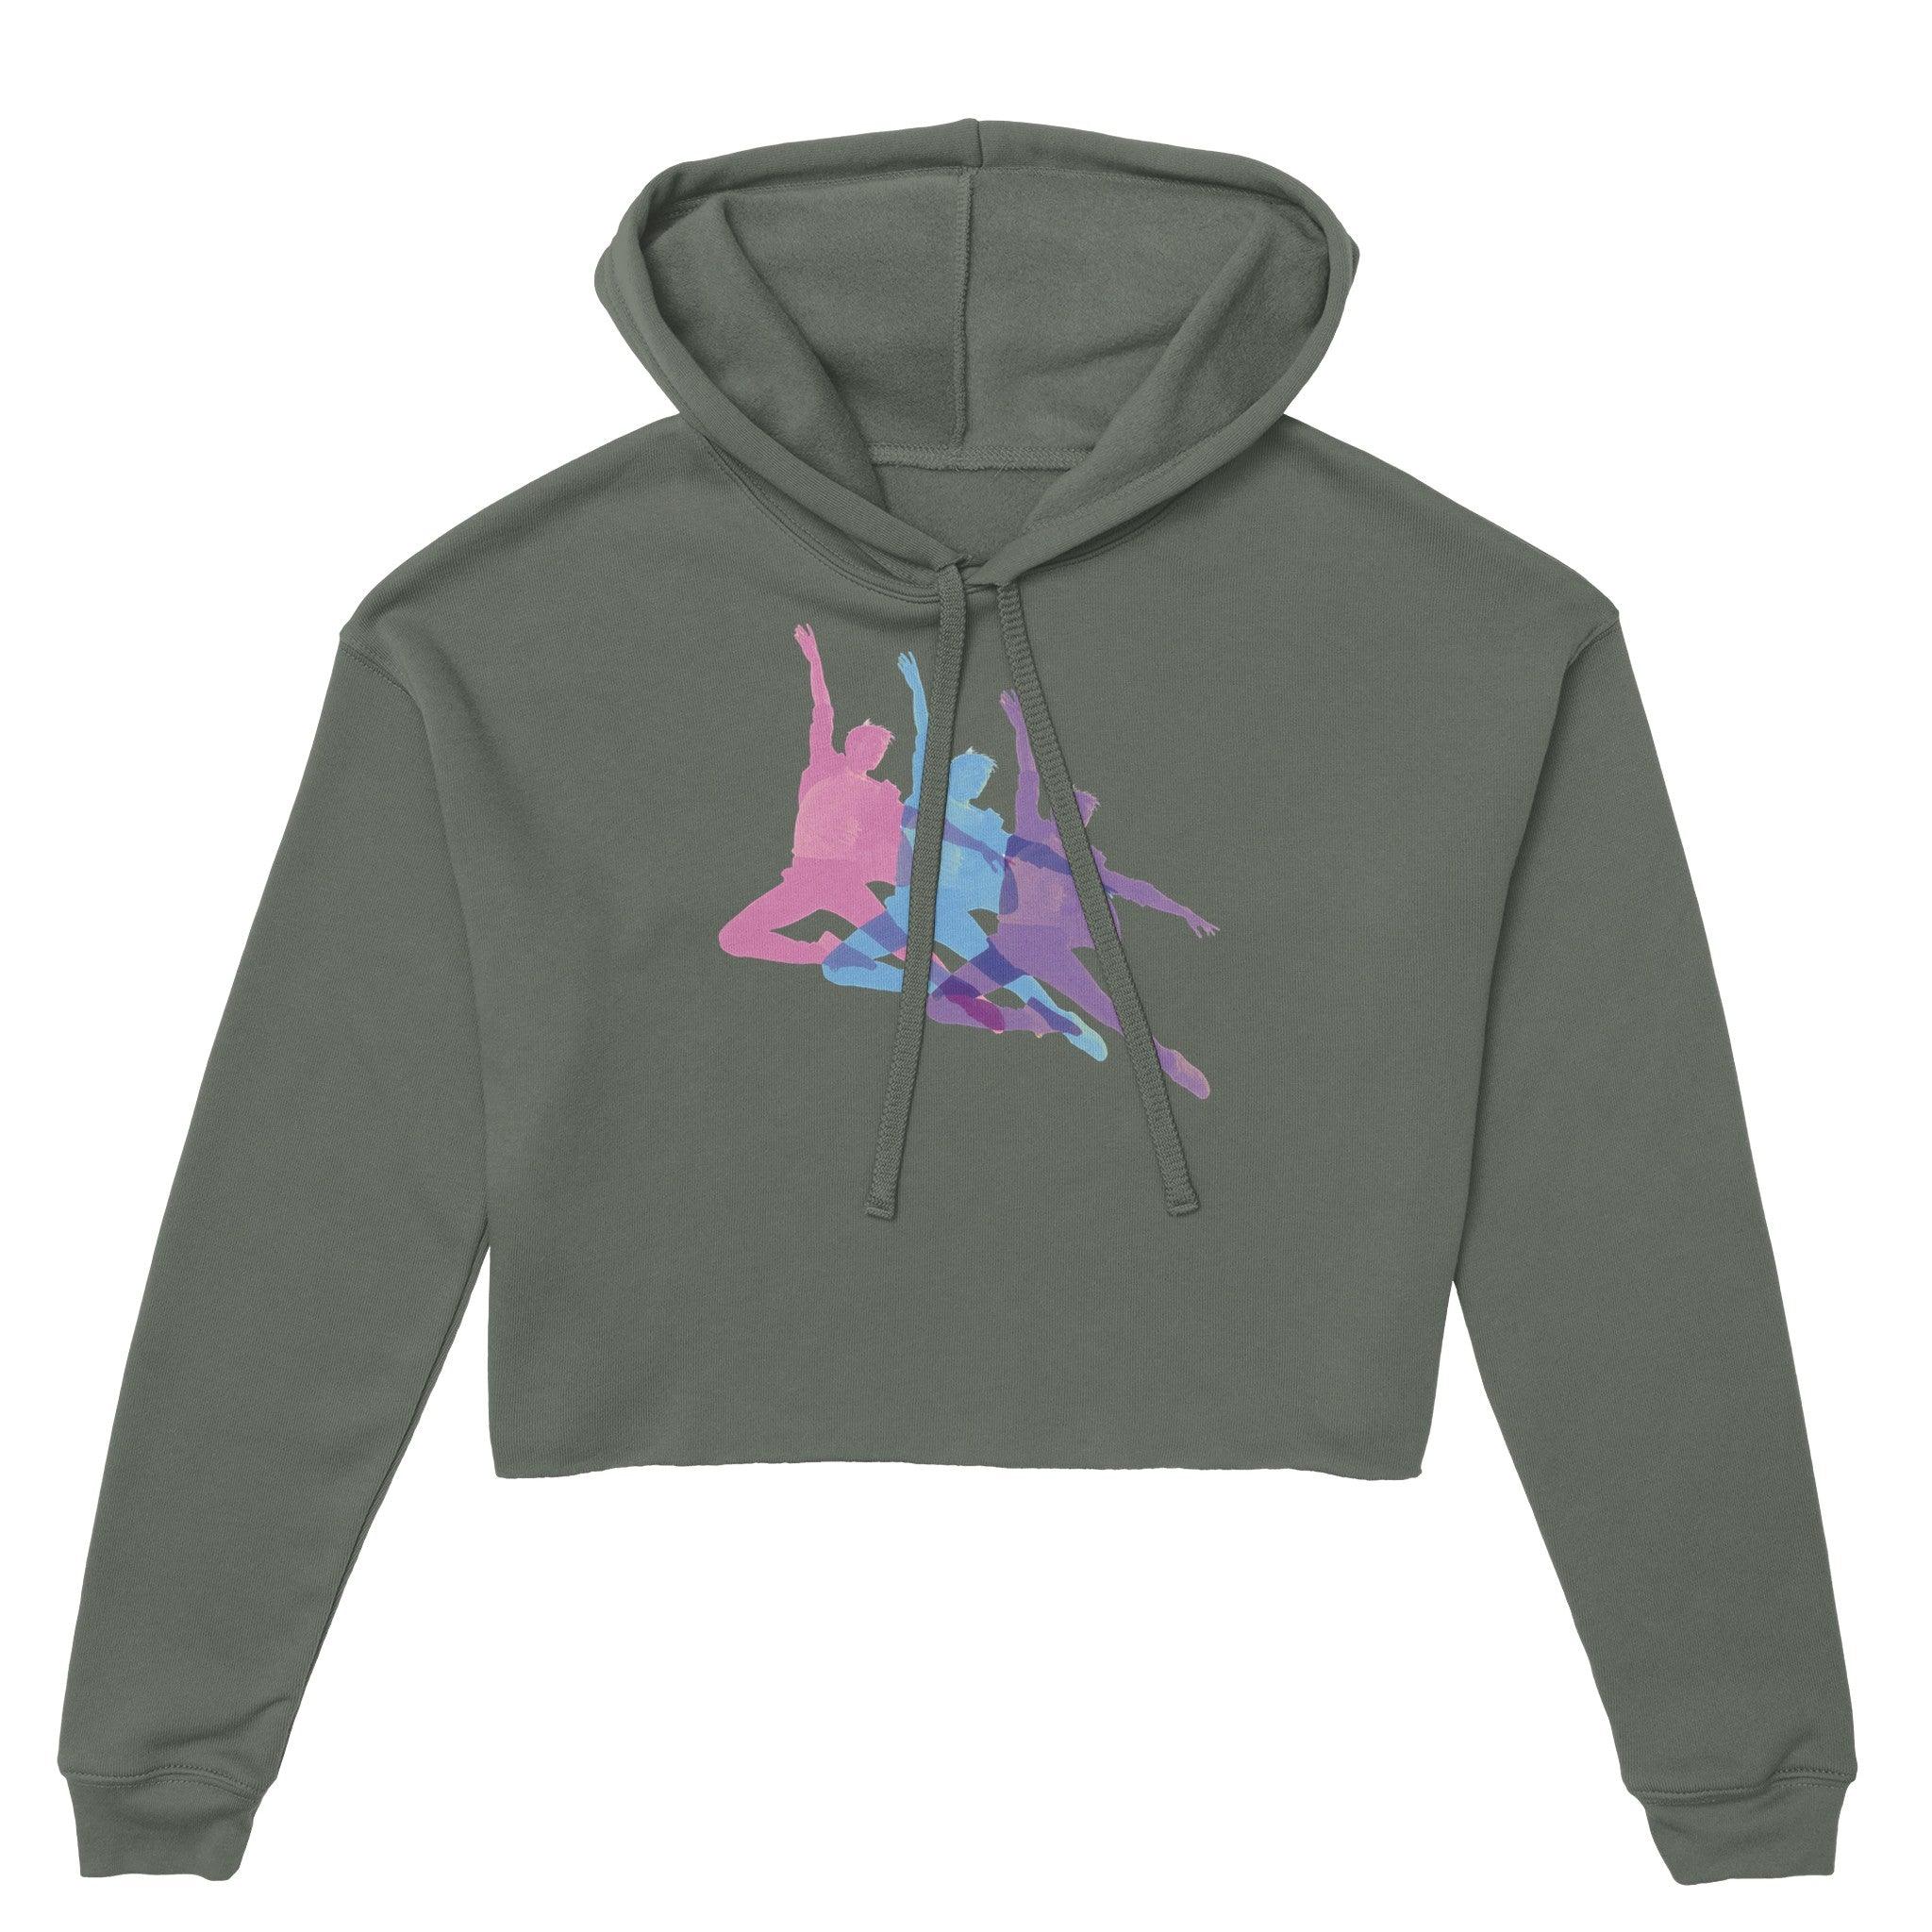 'Dancer' Cropped Hoodie - POMA